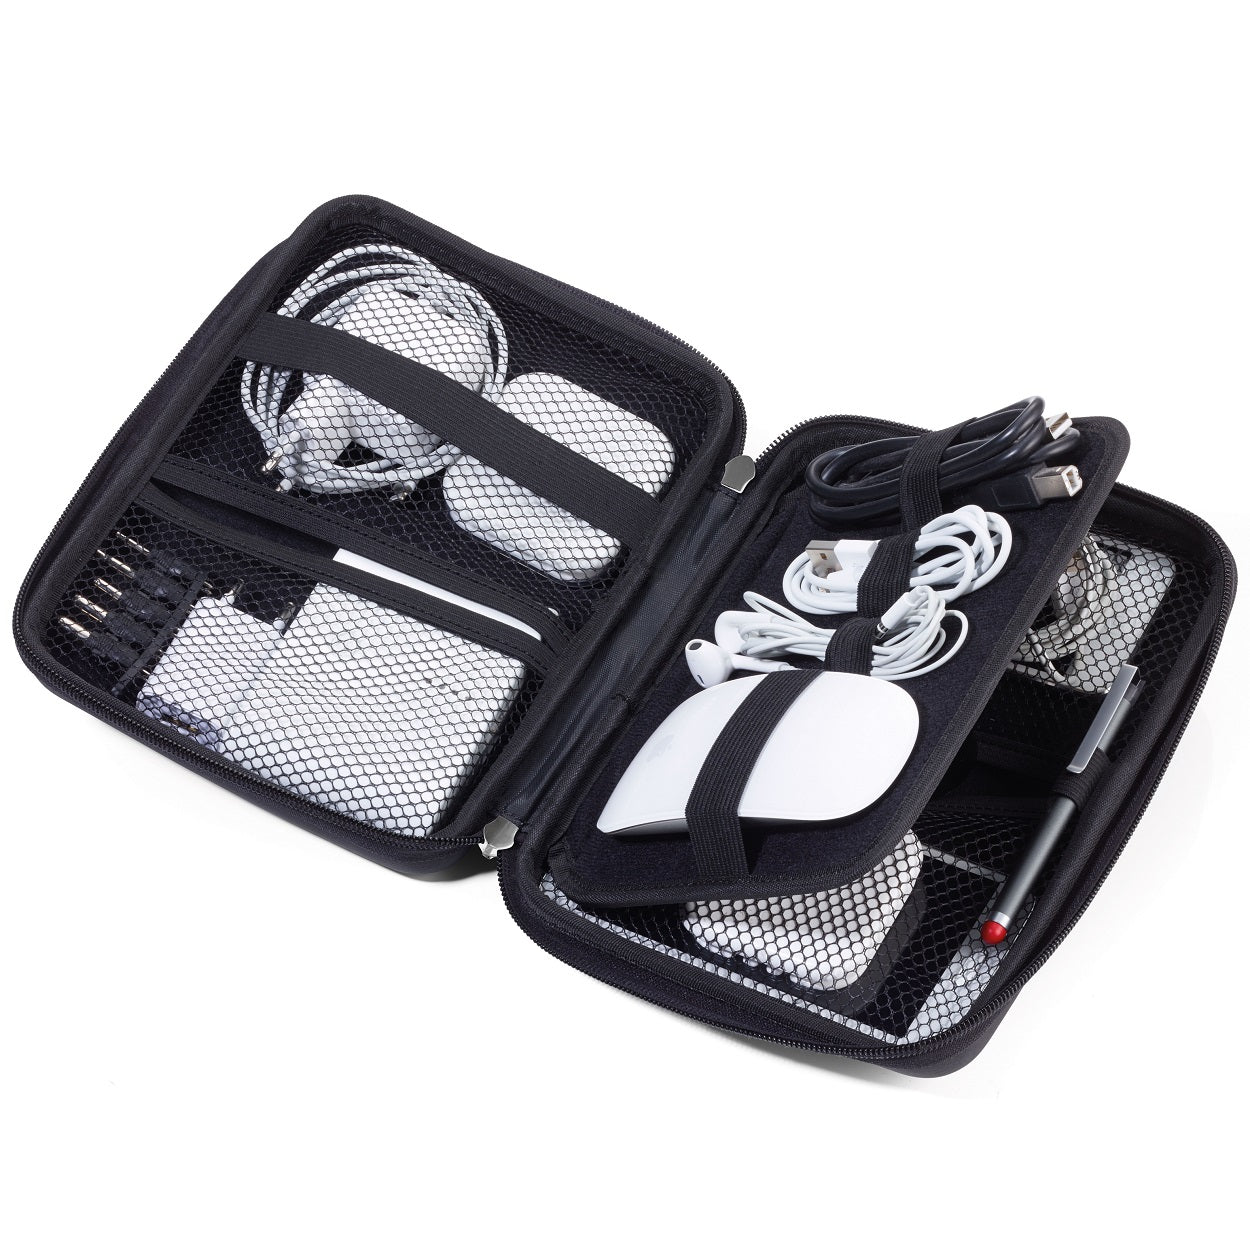 Troika Organiser Case with Zip Everyday Carry EDC CASE